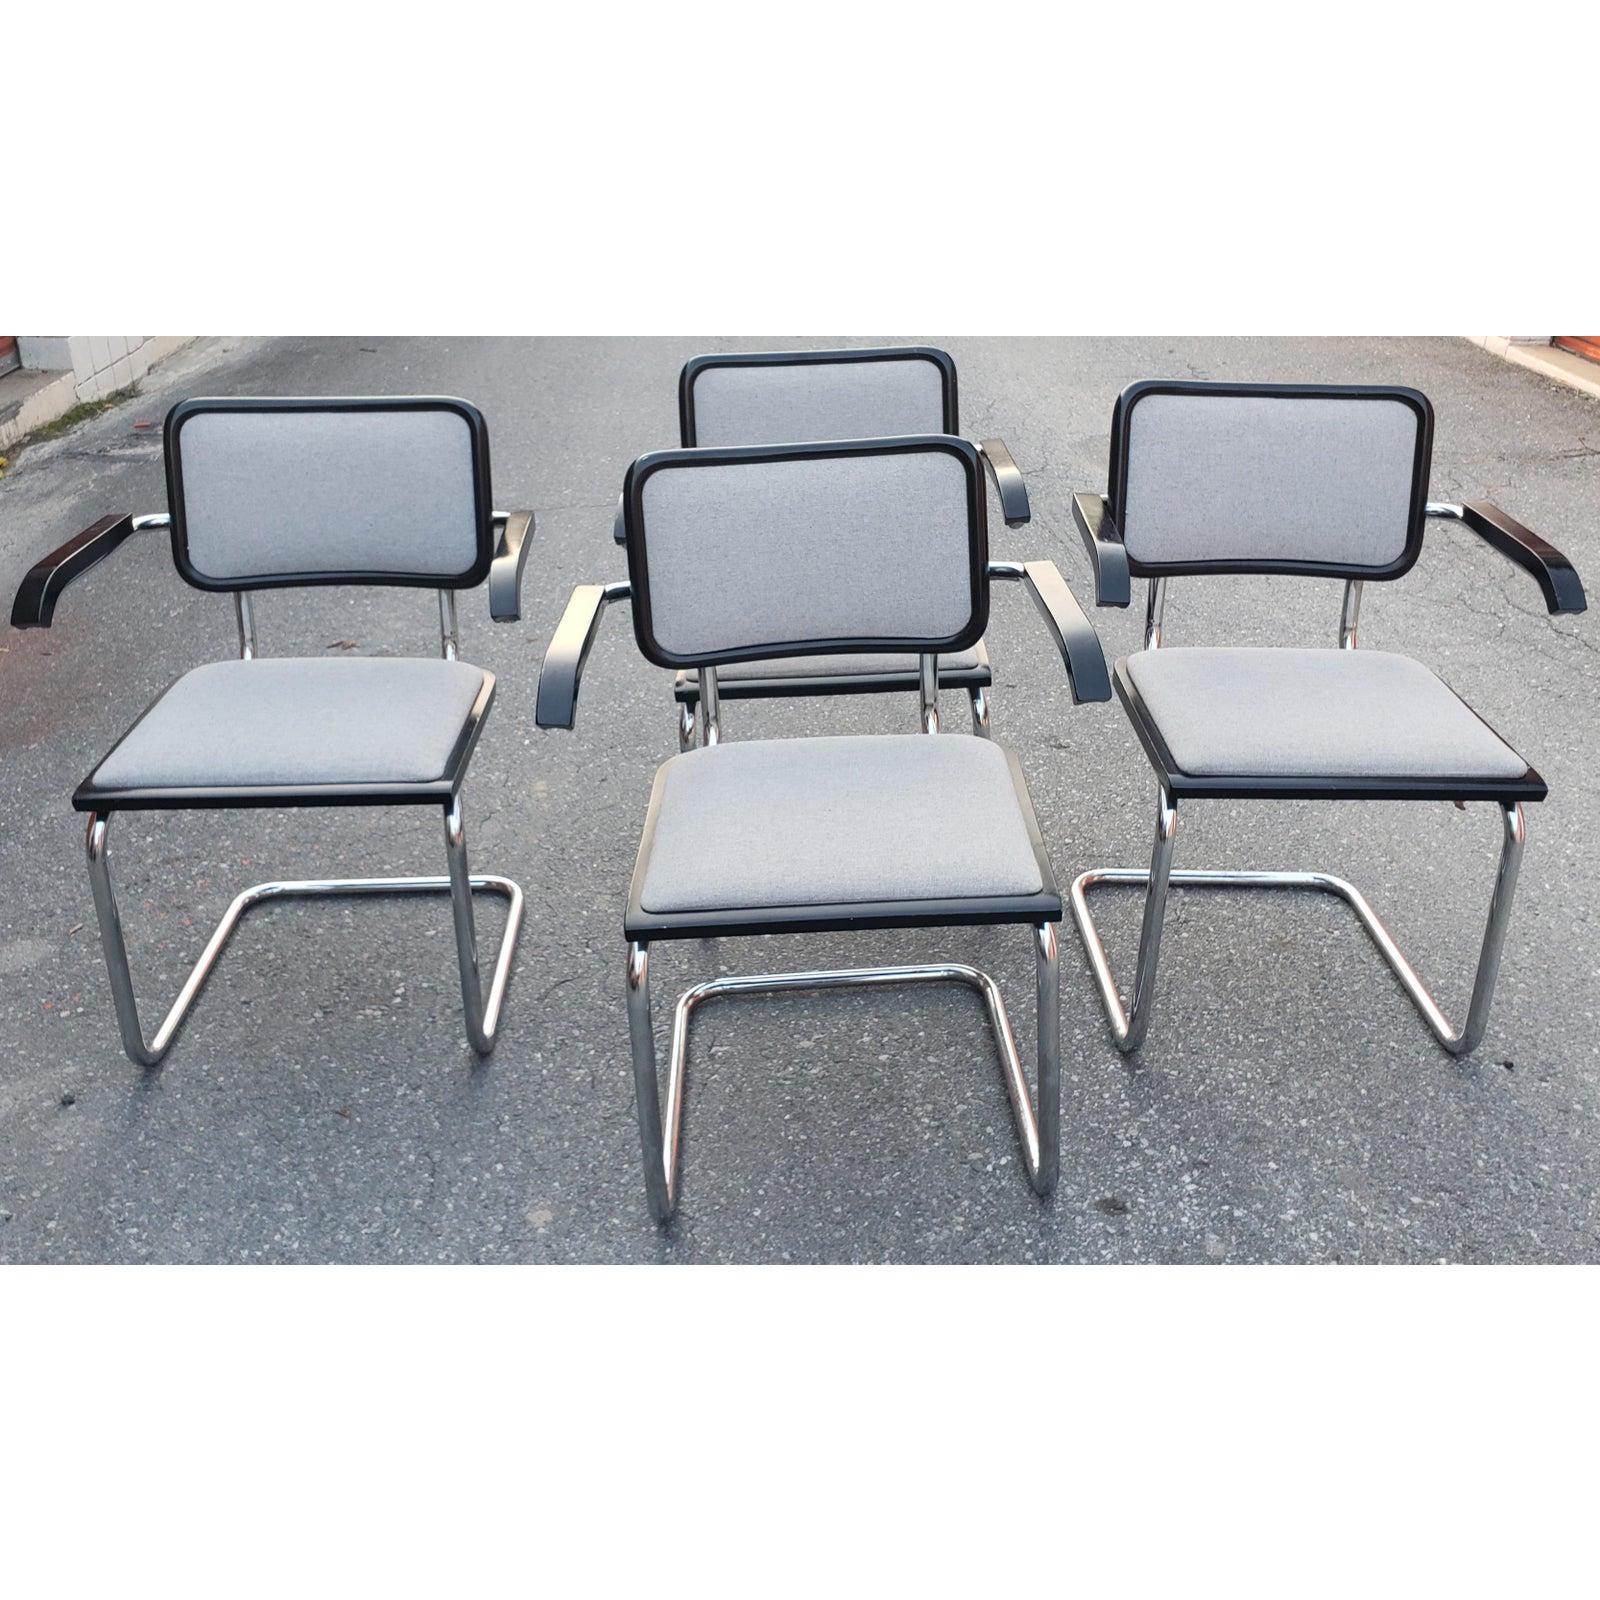 Iconic set of four Marcel Breuer Cesca S64 cantilever armchairs featuring an ebonized lacquered beech frame finish. Beautifully crafted from tubular chrome-plated steel frames and ordered with a rare combination of black with a light grey